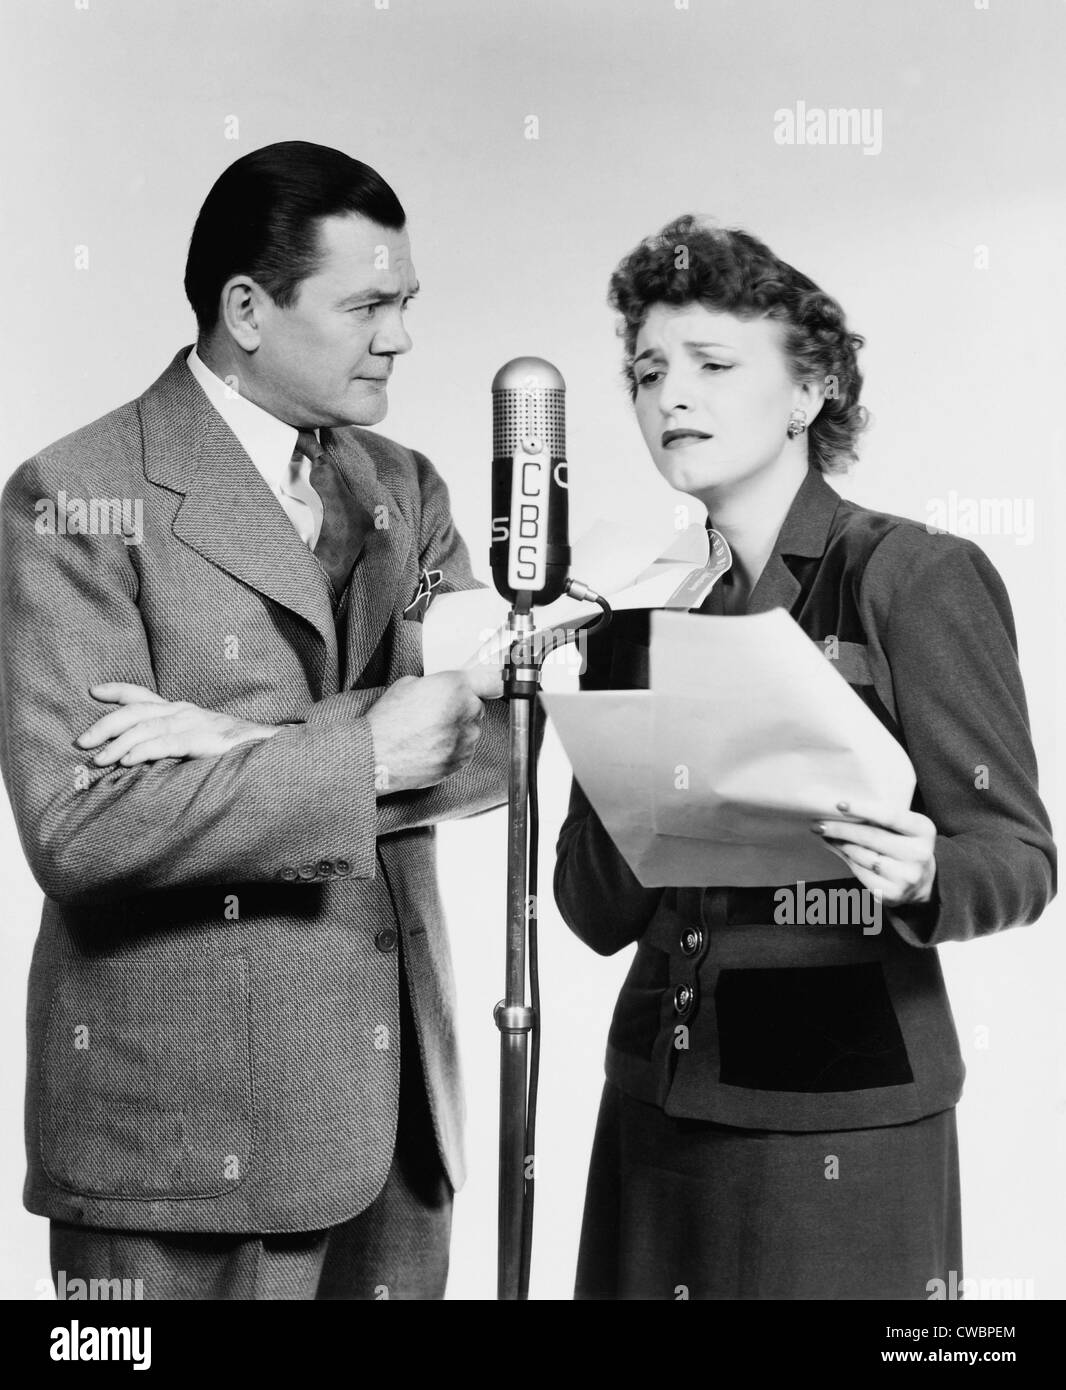 Voice actors Marjorie Hannan and Hugh Studebaker (1900-1973) performing at C.B.S. Radio microphone for the radio show Stock Photo